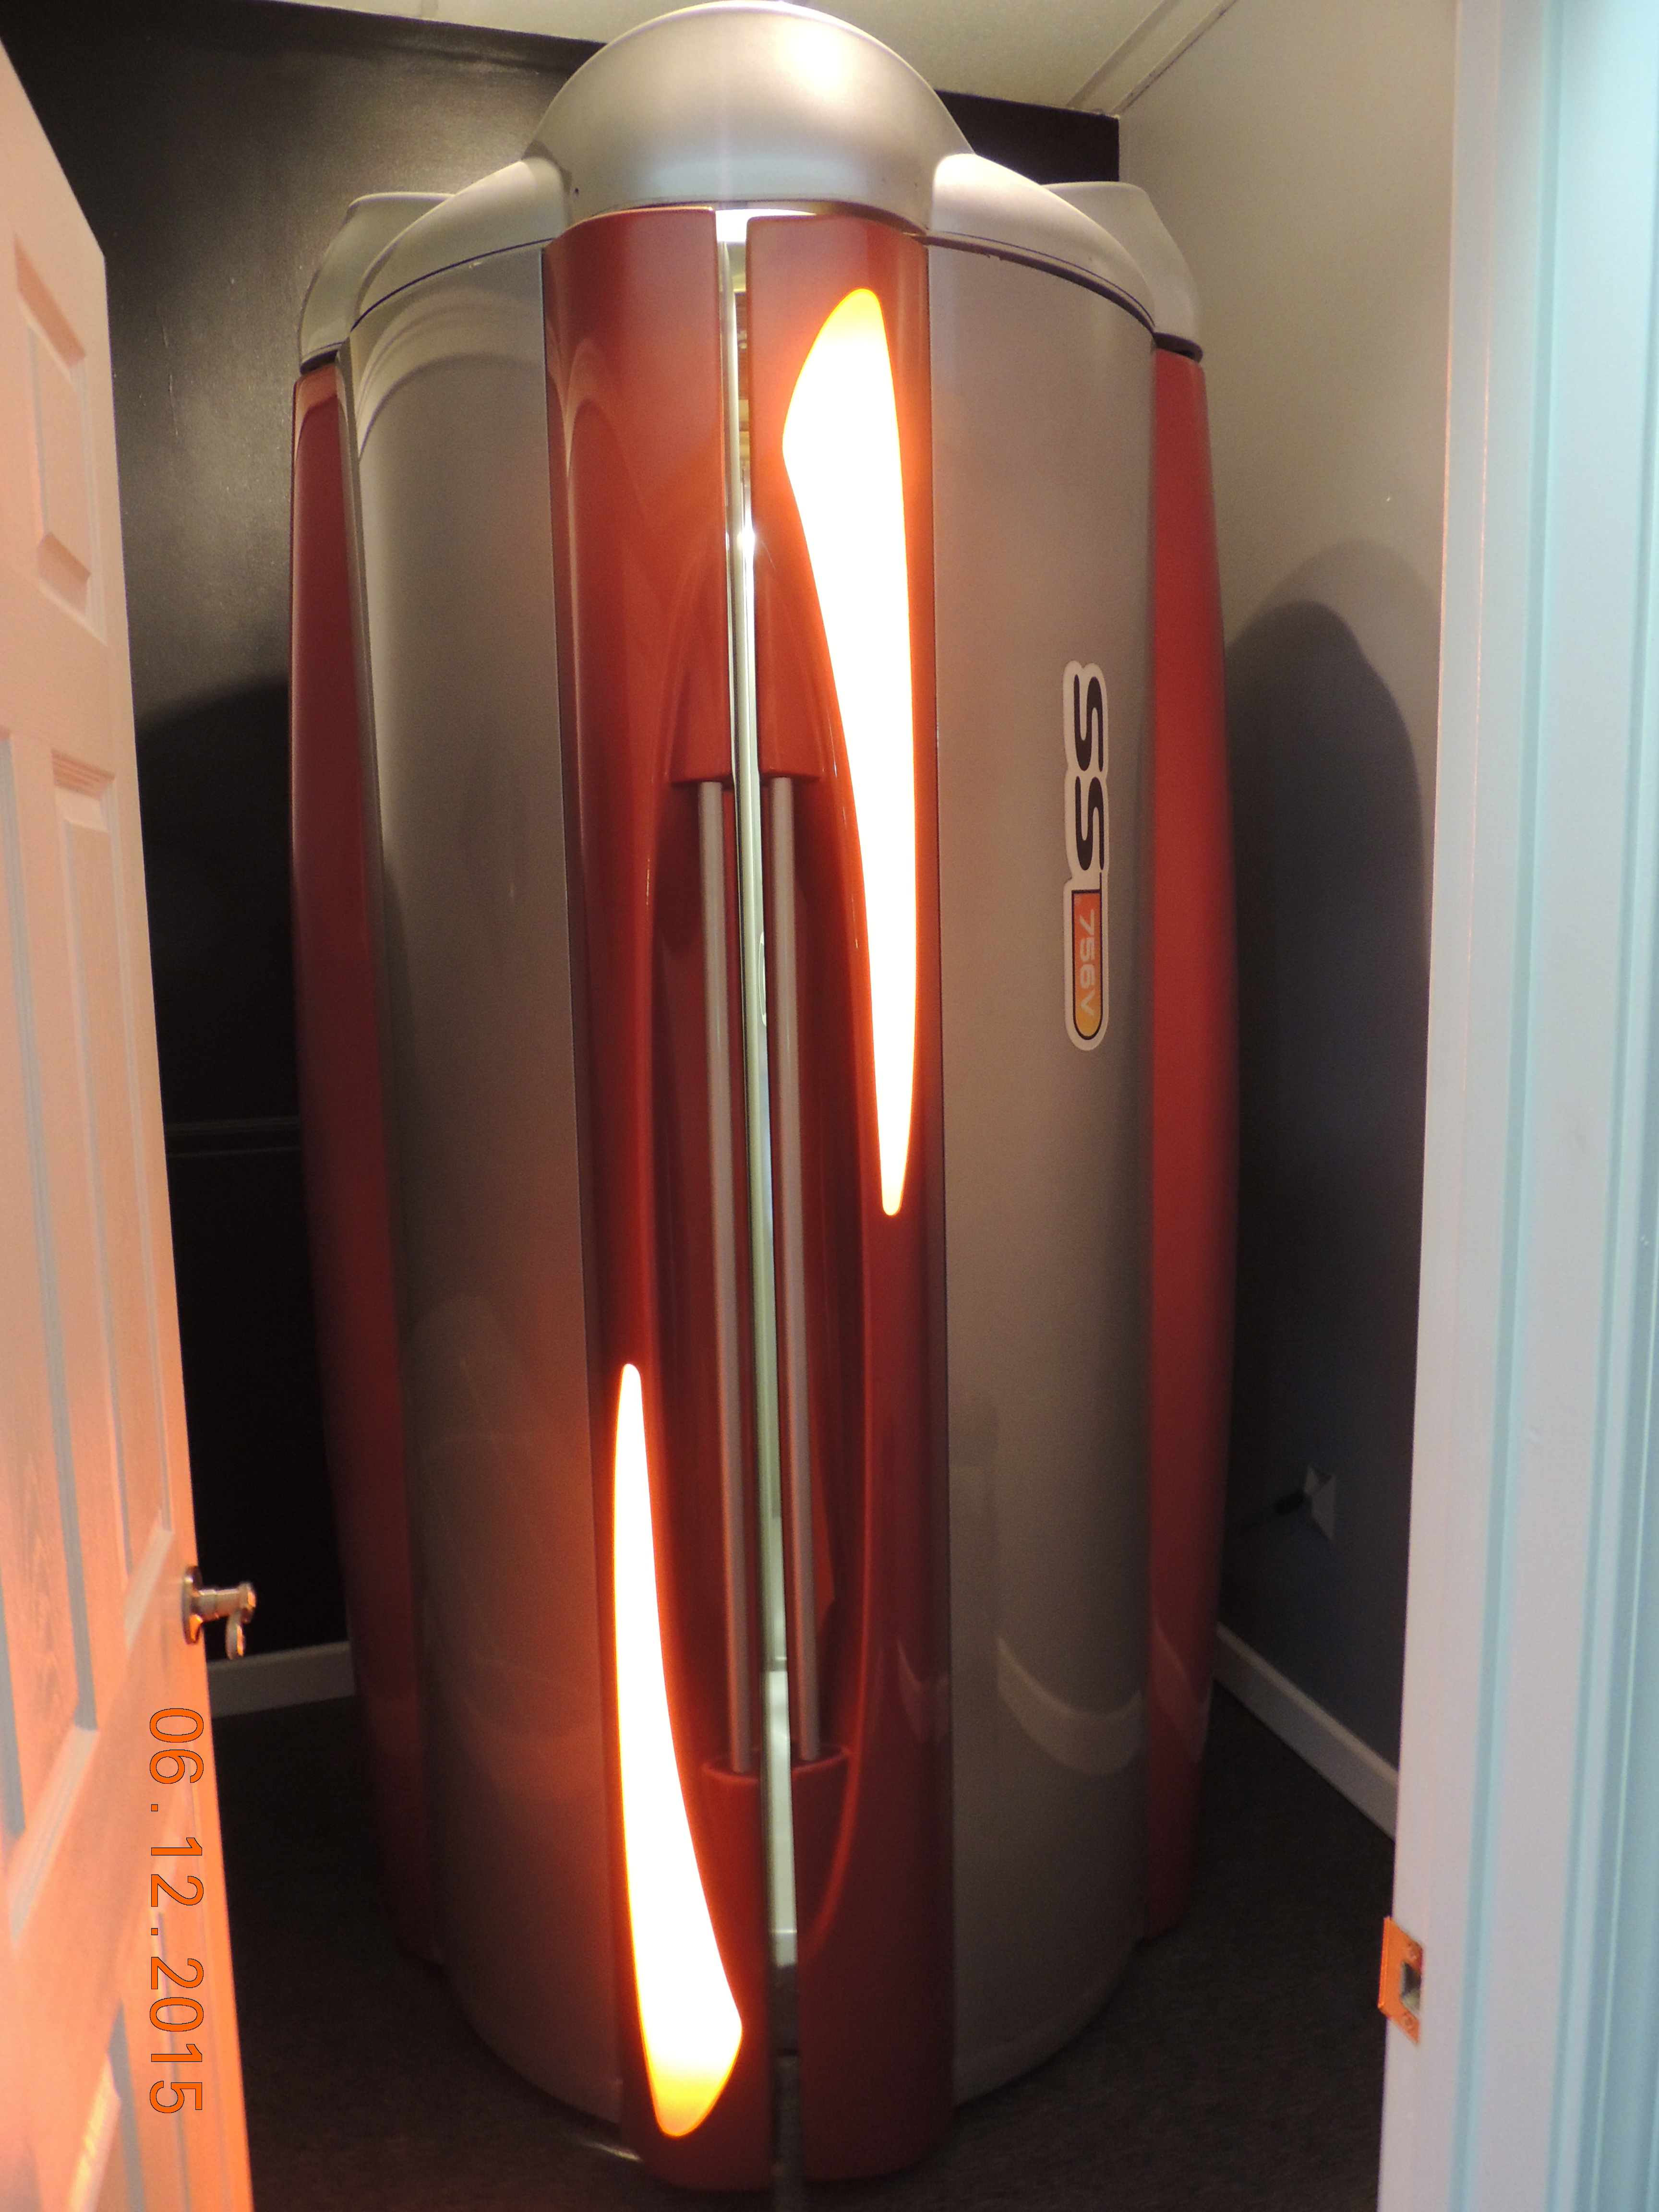 Sunscape/ Elite SS756V tanning booth..  56-180-200W 2M Bronzing Lamps, 8 Minute Max Time.  220-230VAC, 1 Phase or 3 Phase.  This price also includes Buck Booster.

Please call 1-800-667-9189 for more details and pictures.

Model Year 
This unit retailed for 29,500.00
Planet Beach Elite/ SunScape 756V

The SunScape 756V is the vertical up version of the SunScape SS755.
8 minute maximum session time - fifty-six 200W lamps and a large 1800 cfm cooling system.
200 Watt tanning lamps outperform 160 Watt lamps by as much as 40%.

Doors closed: 59.5